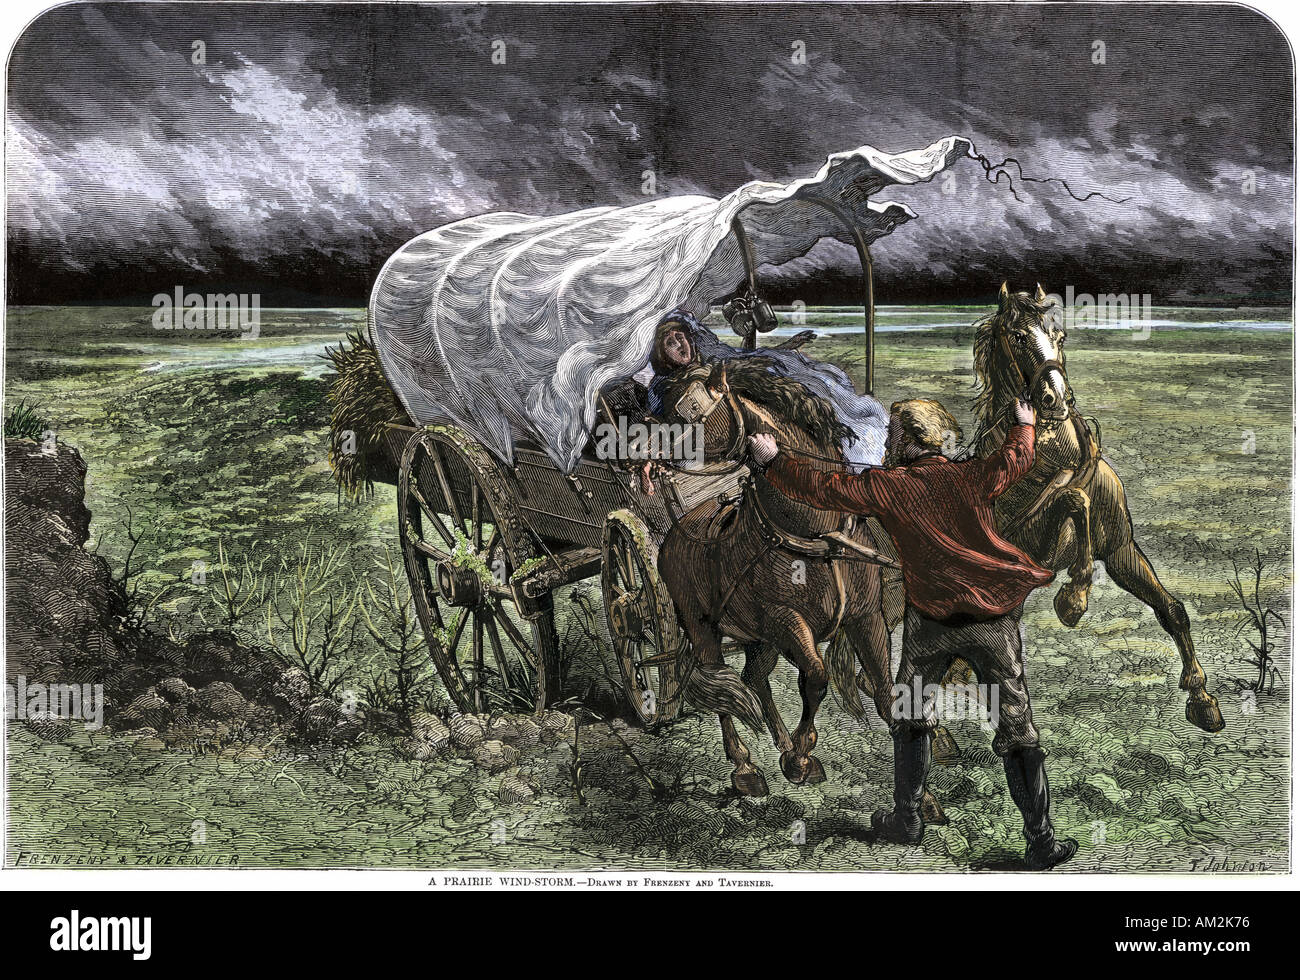 Family in a covered wagon during a prairie windstorm 1800s. Hand-colored woodcut Stock Photo